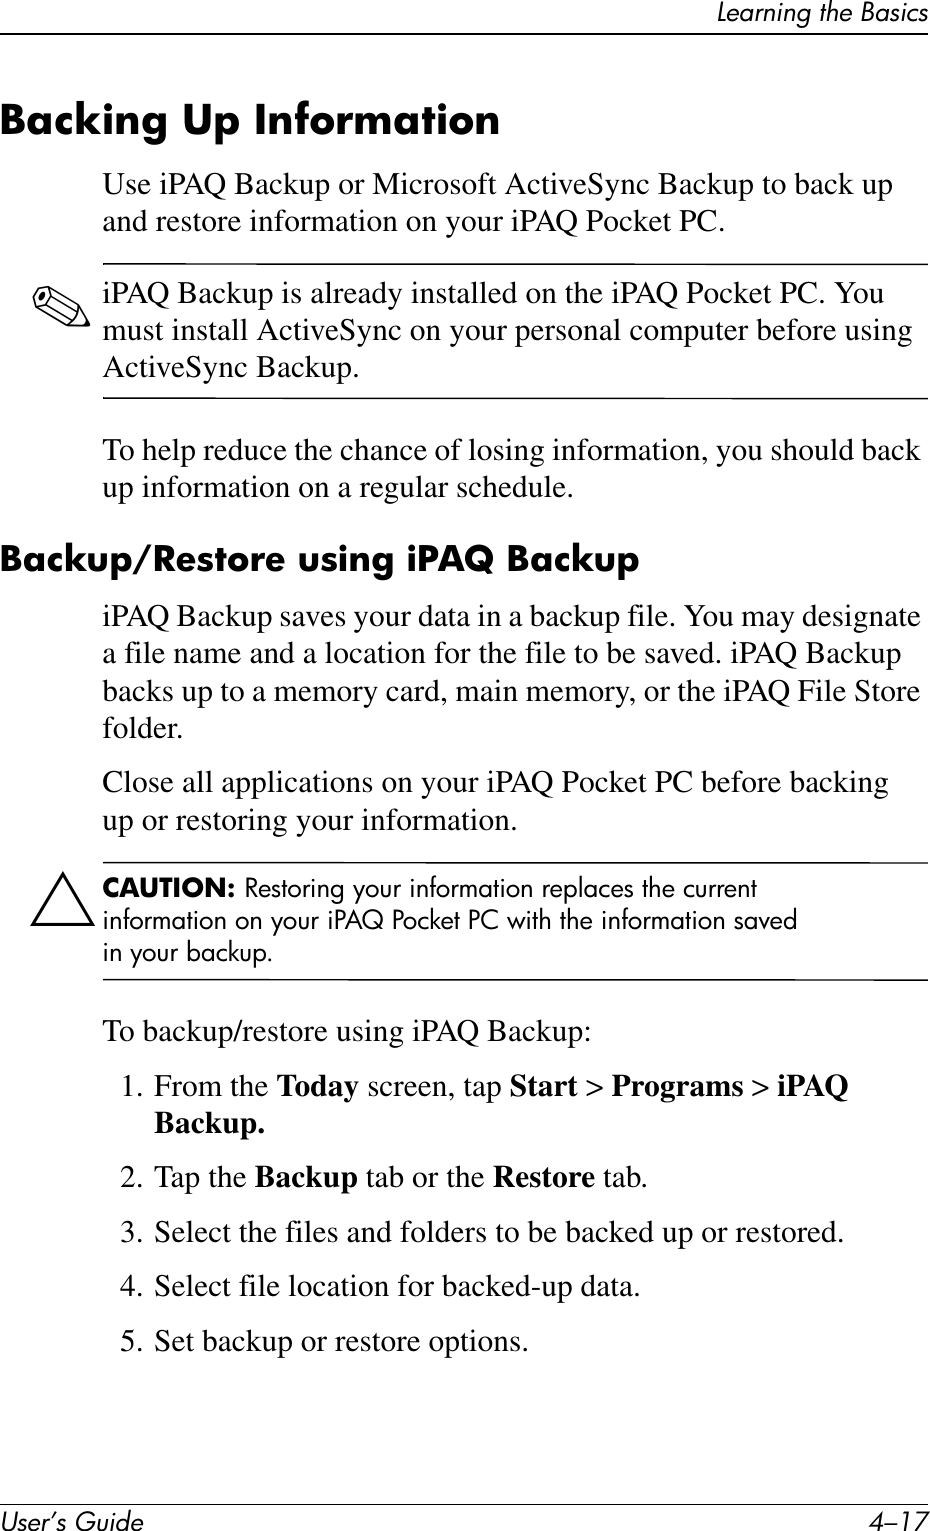 Learning the BasicsUser’s Guide 4–17Backing Up InformationUse iPAQ Backup or Microsoft ActiveSync Backup to back up and restore information on your iPAQ Pocket PC.✎iPAQ Backup is already installed on the iPAQ Pocket PC. You must install ActiveSync on your personal computer before using ActiveSync Backup.To help reduce the chance of losing information, you should back up information on a regular schedule.Backup/Restore using iPAQ BackupiPAQ Backup saves your data in a backup file. You may designate a file name and a location for the file to be saved. iPAQ Backup backs up to a memory card, main memory, or the iPAQ File Store folder.Close all applications on your iPAQ Pocket PC before backing up or restoring your information.ÄCAUTION: Restoring your information replaces the current information on your iPAQ Pocket PC with the information saved in your backup.To backup/restore using iPAQ Backup:1. From the Today screen, tap Start &gt; Programs &gt; iPAQ Backup.2. Tap the Backup tab or the Restore tab.3. Select the files and folders to be backed up or restored.4. Select file location for backed-up data.5. Set backup or restore options.